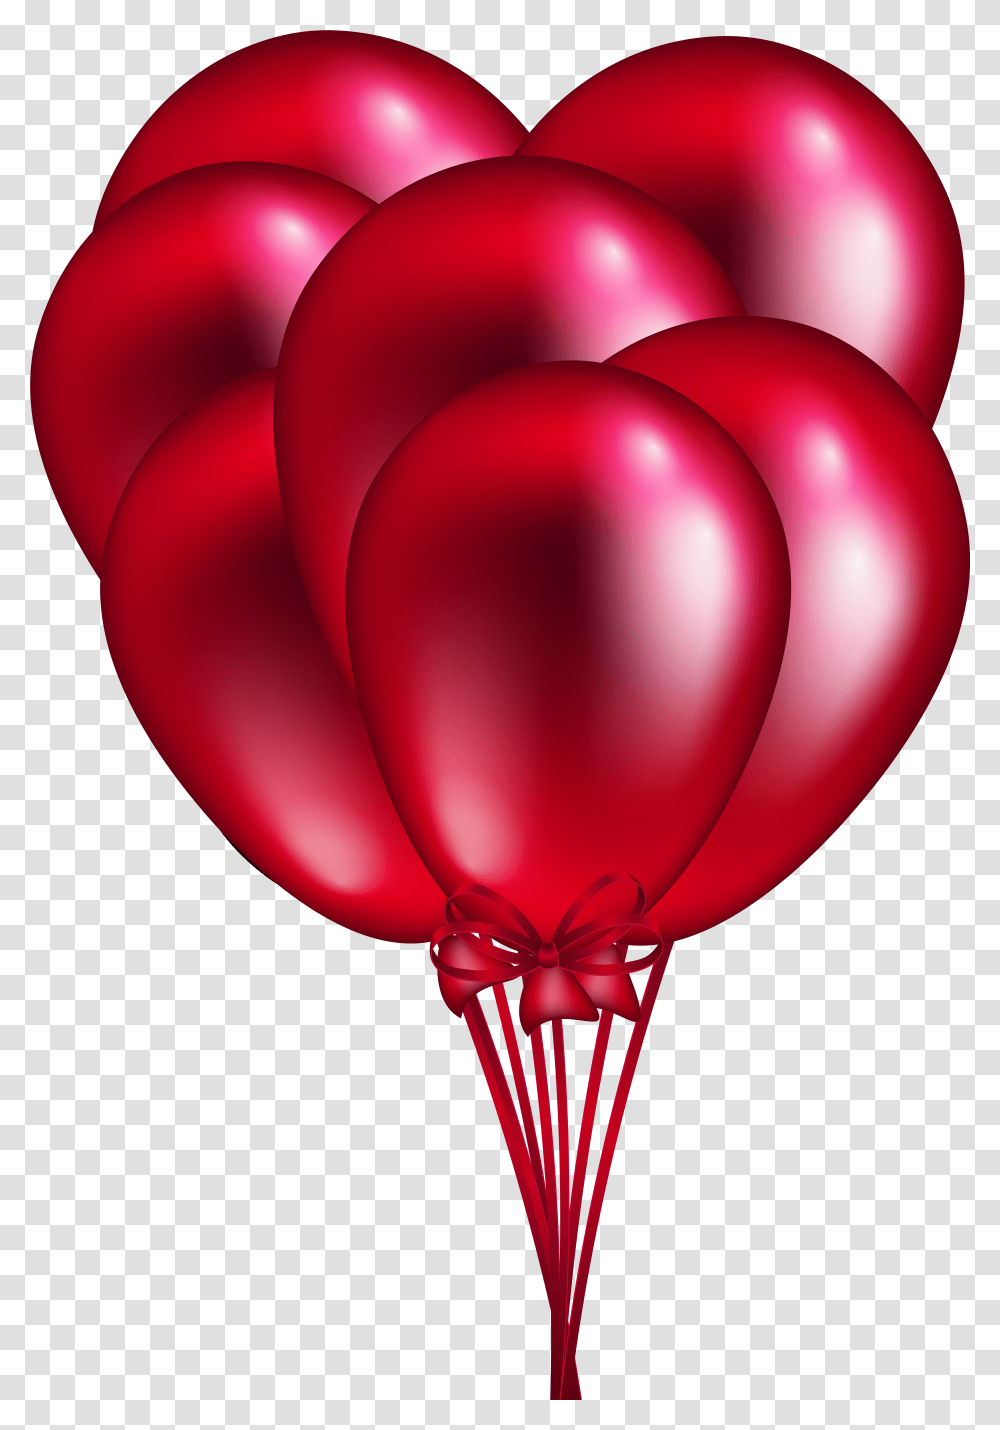 Library Of Heart Balloon Vector Black Background Red Balloons Transparent Png